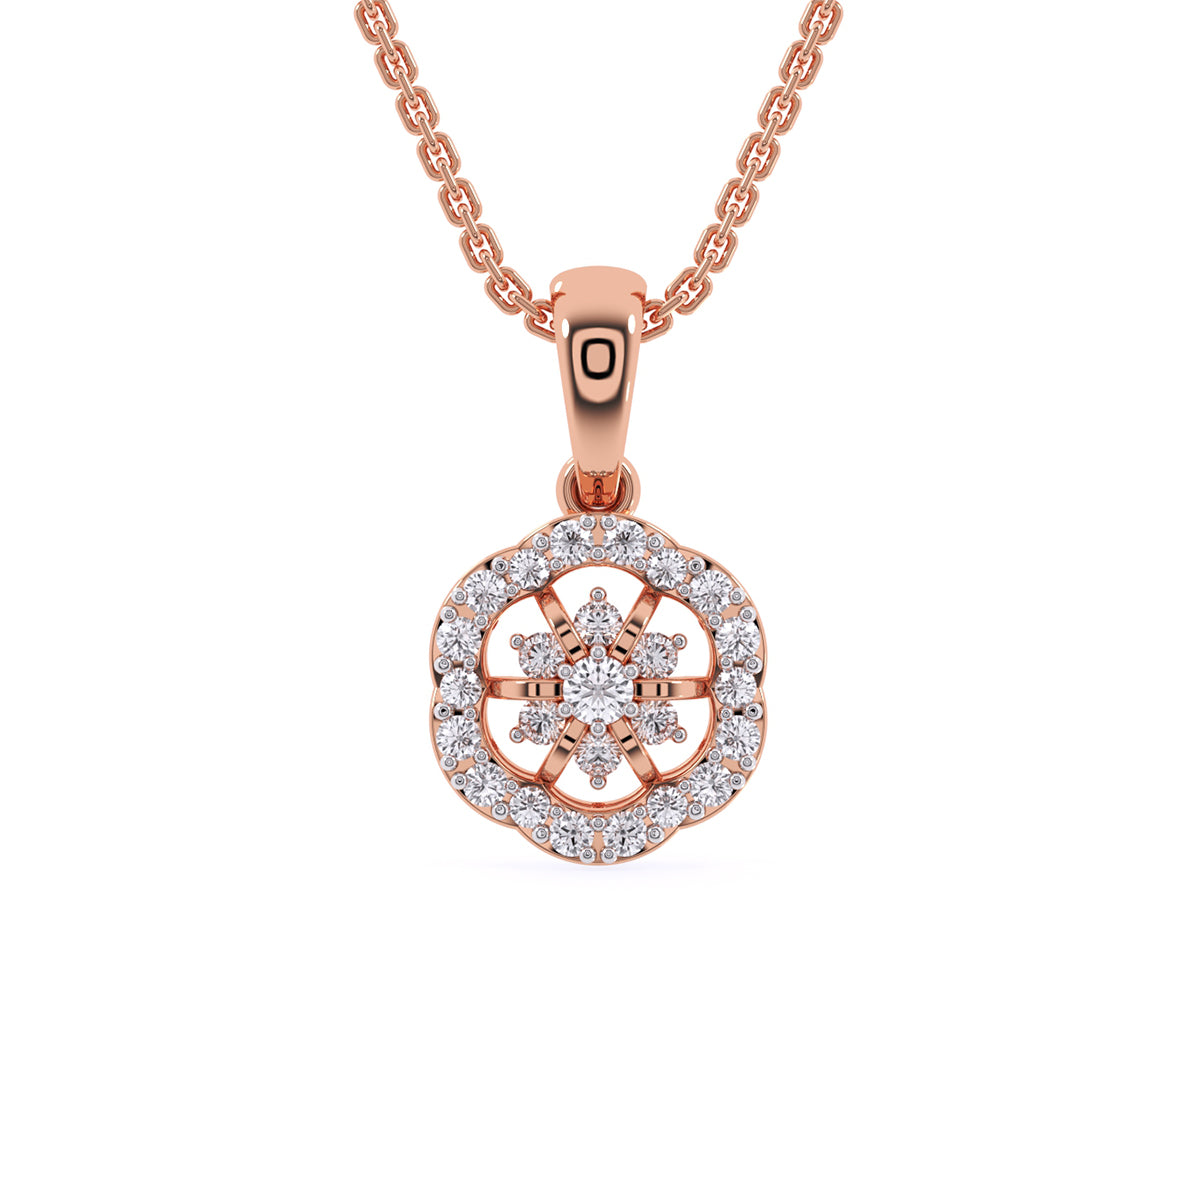 Pretty in Pink Rose Gold and Diamond Pendant and Earrings Set